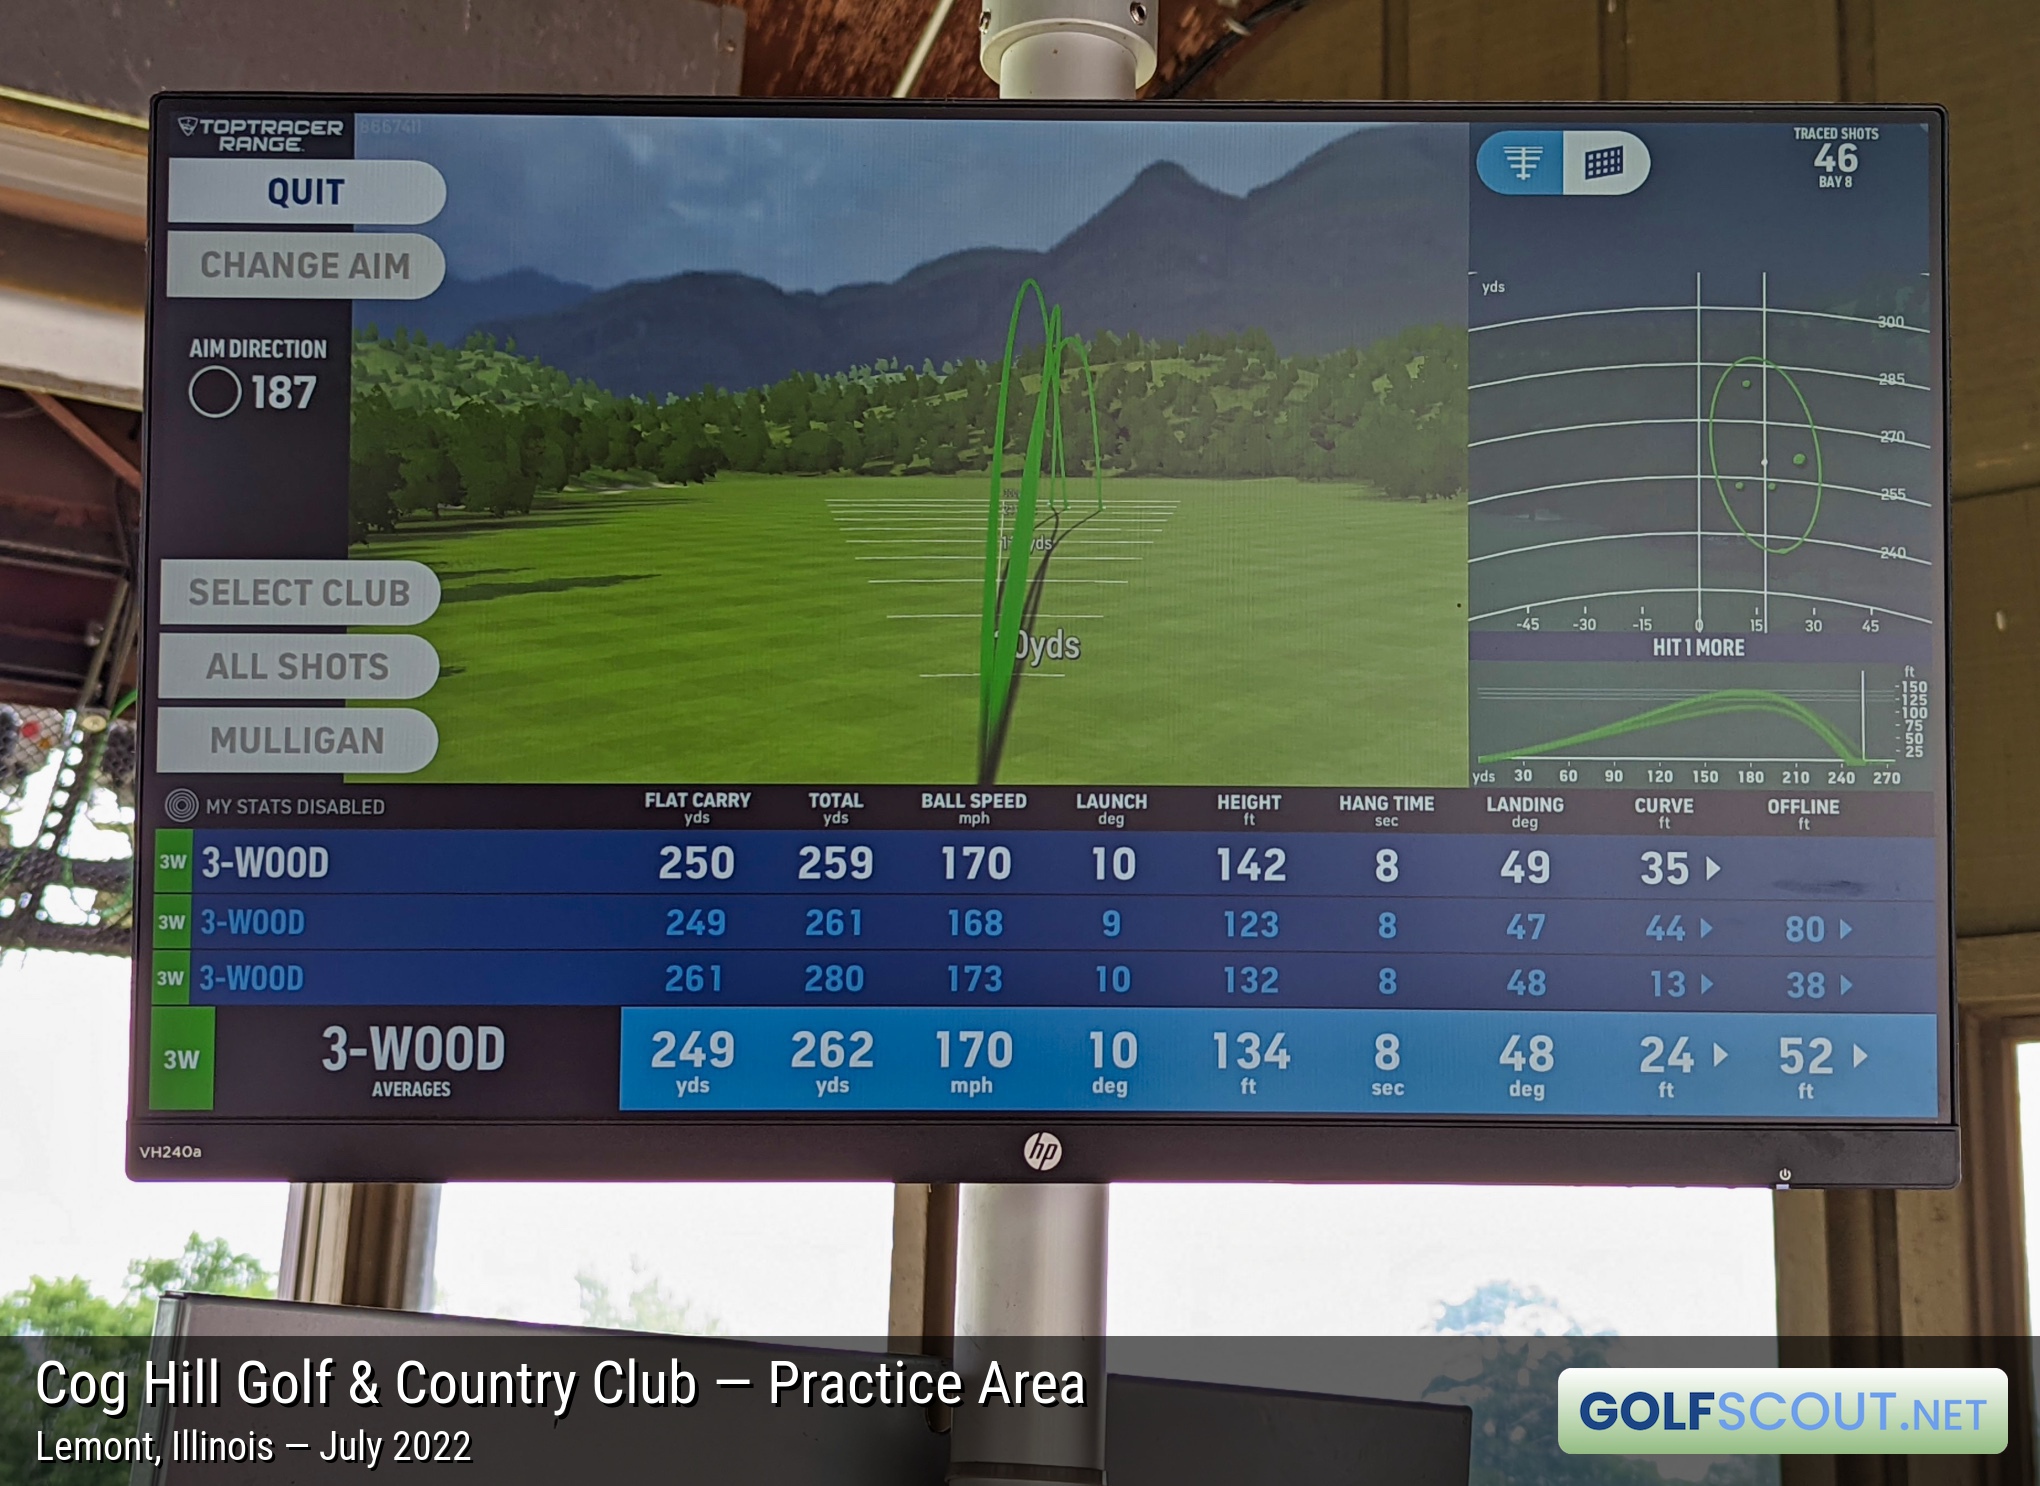 Photo of the practice area at Cog Hill Course #3 in Lemont, Illinois. TopTracer keeps track of all your shots. You get the carry distance, total distance, ball speed, launch angle, height, hang time, etc. Really cool to see your cumulative shot stats and trajectories.